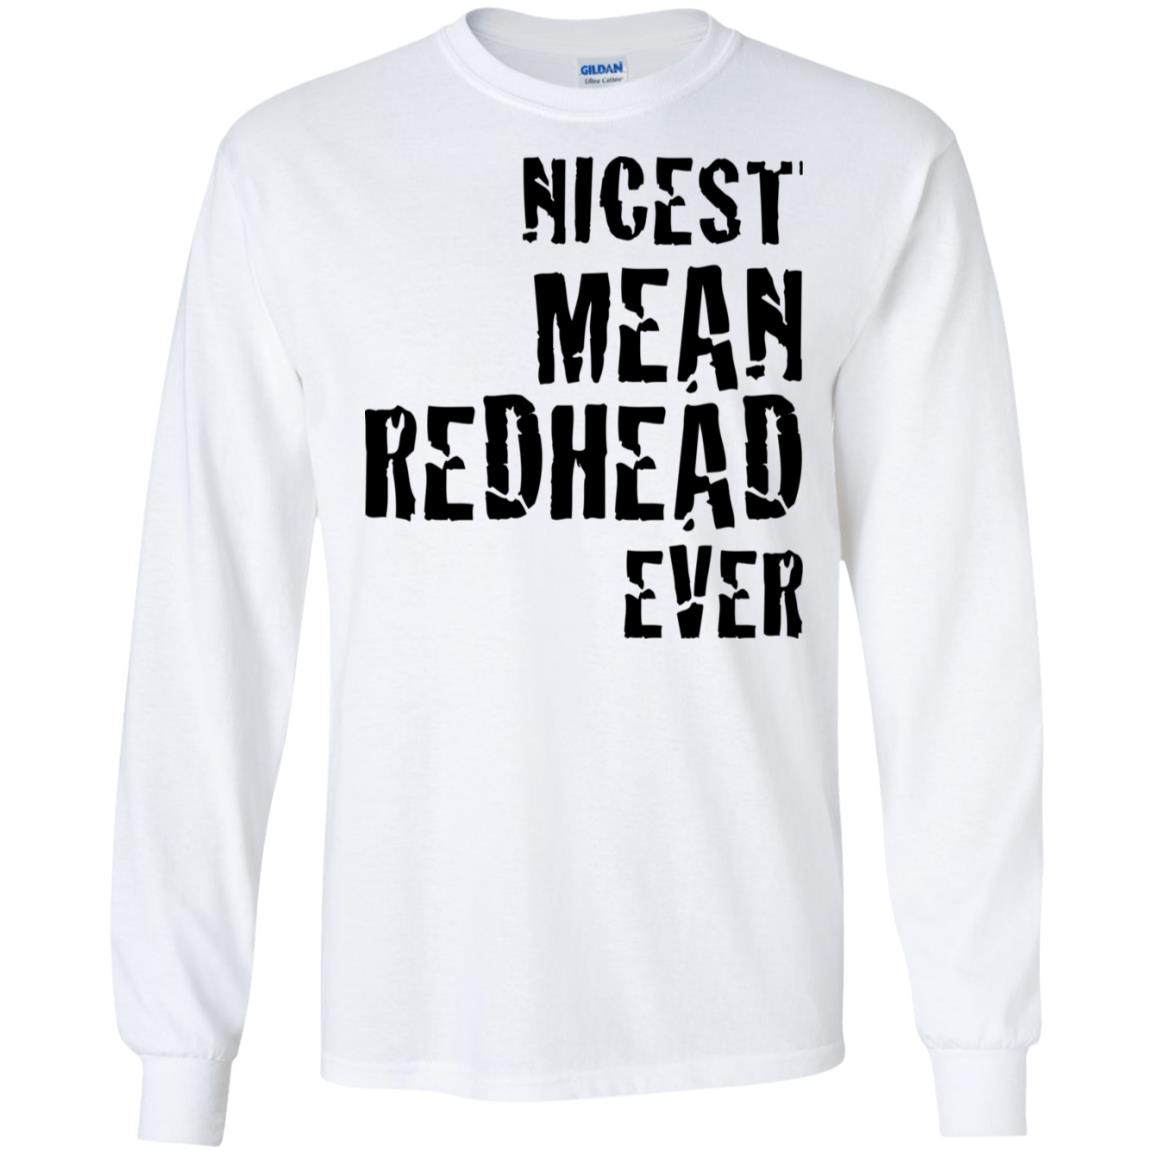 Nicest Mean Redhead Ever Shirt Tank top long sleeves - Q-Finder ...